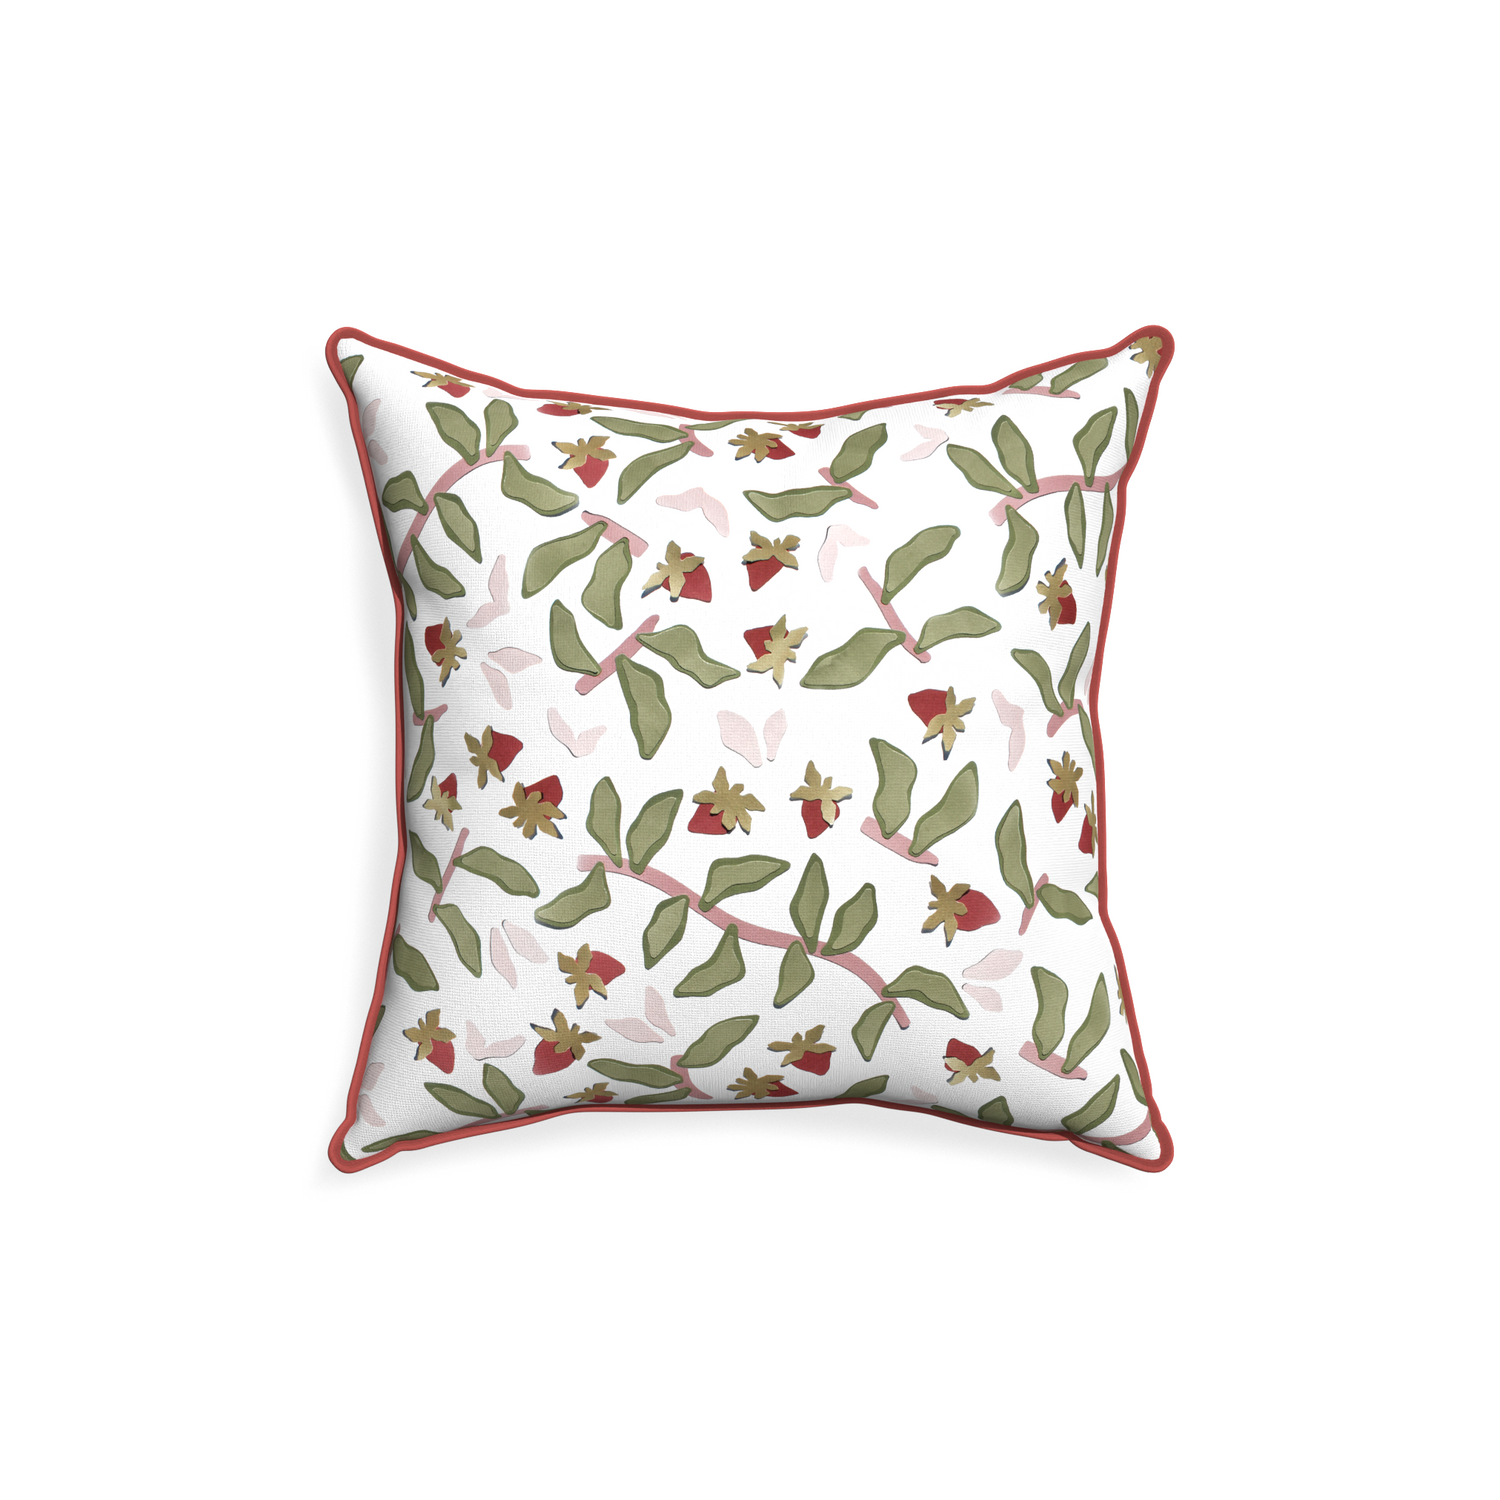 18-square nellie custom strawberry & botanicalpillow with c piping on white background